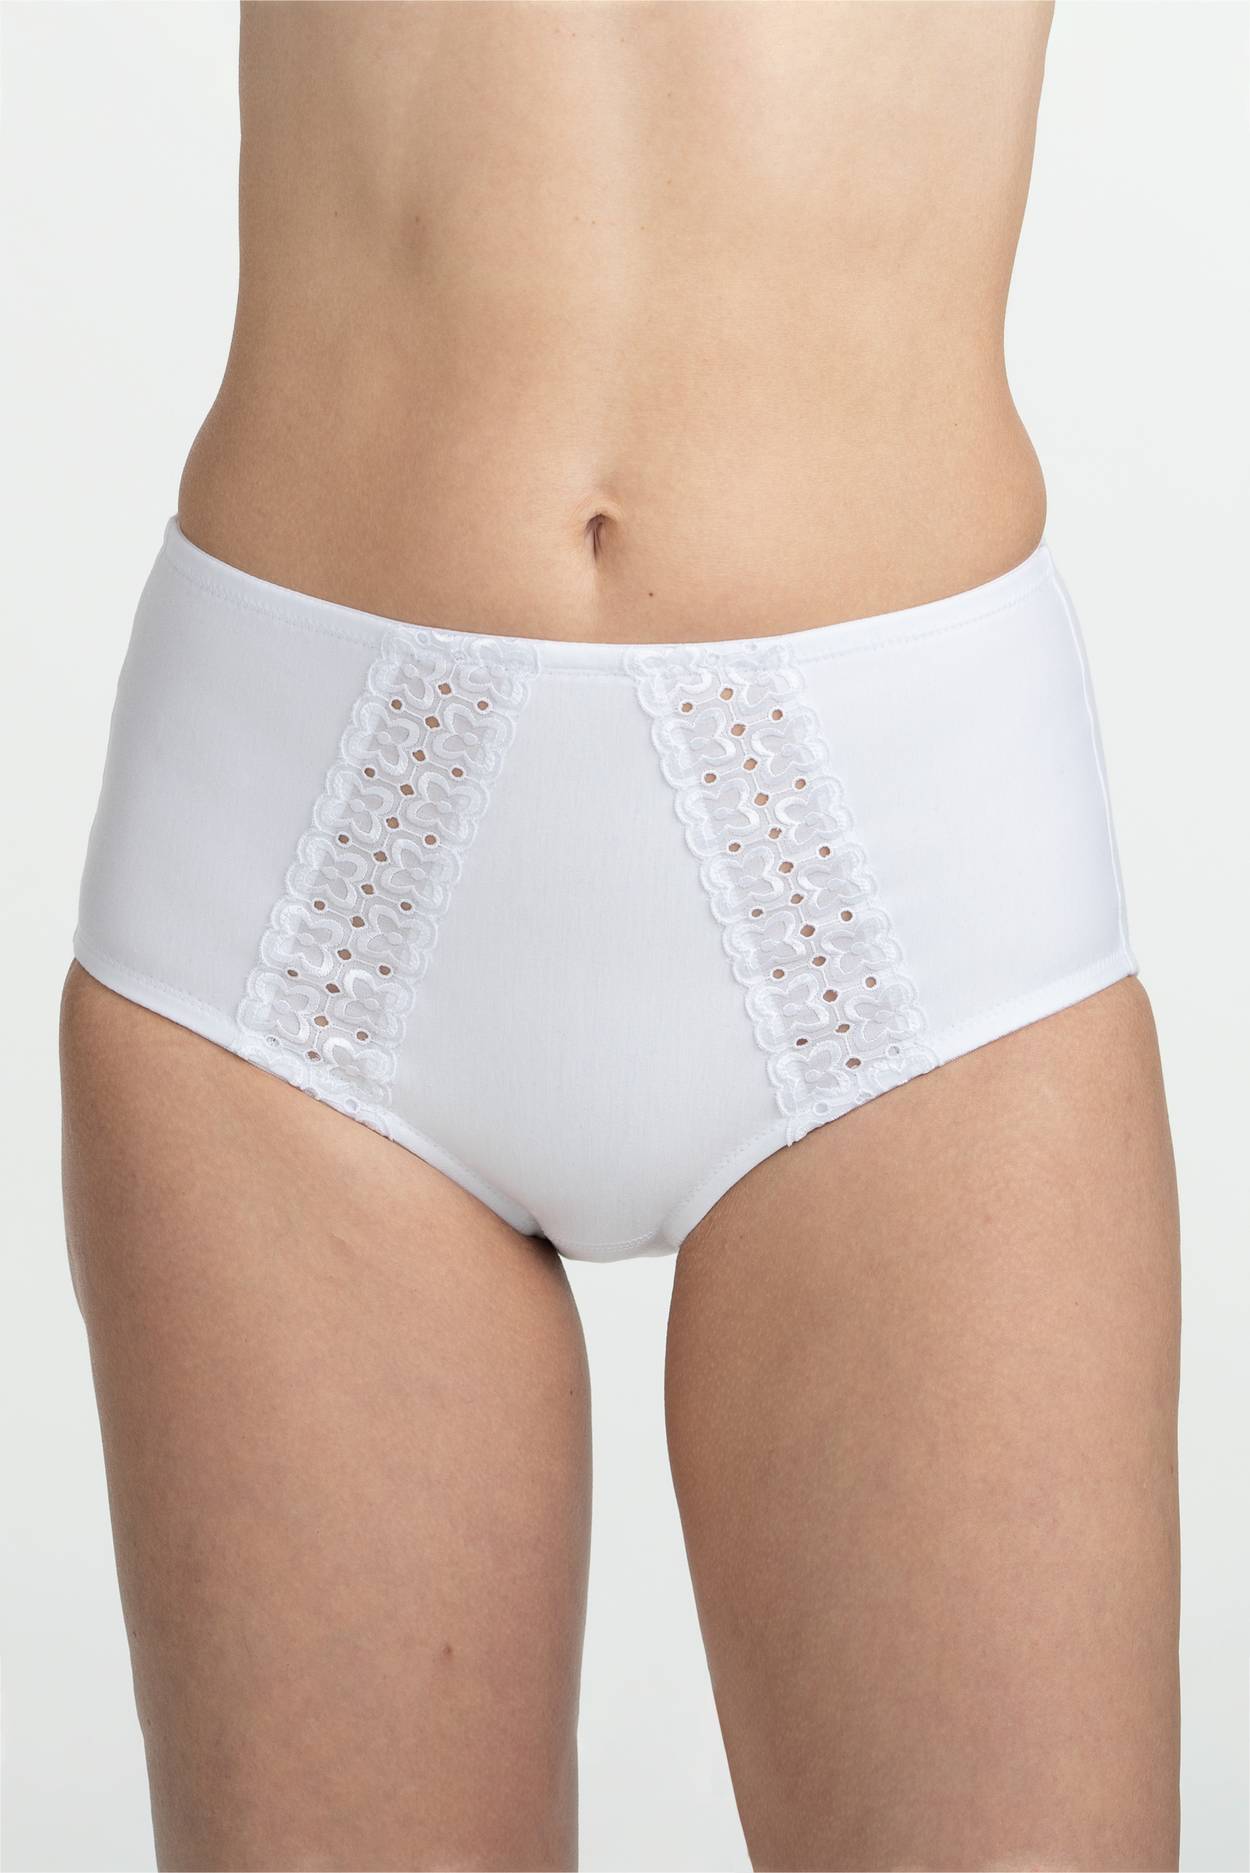 Broderie Anglaise panty girdle